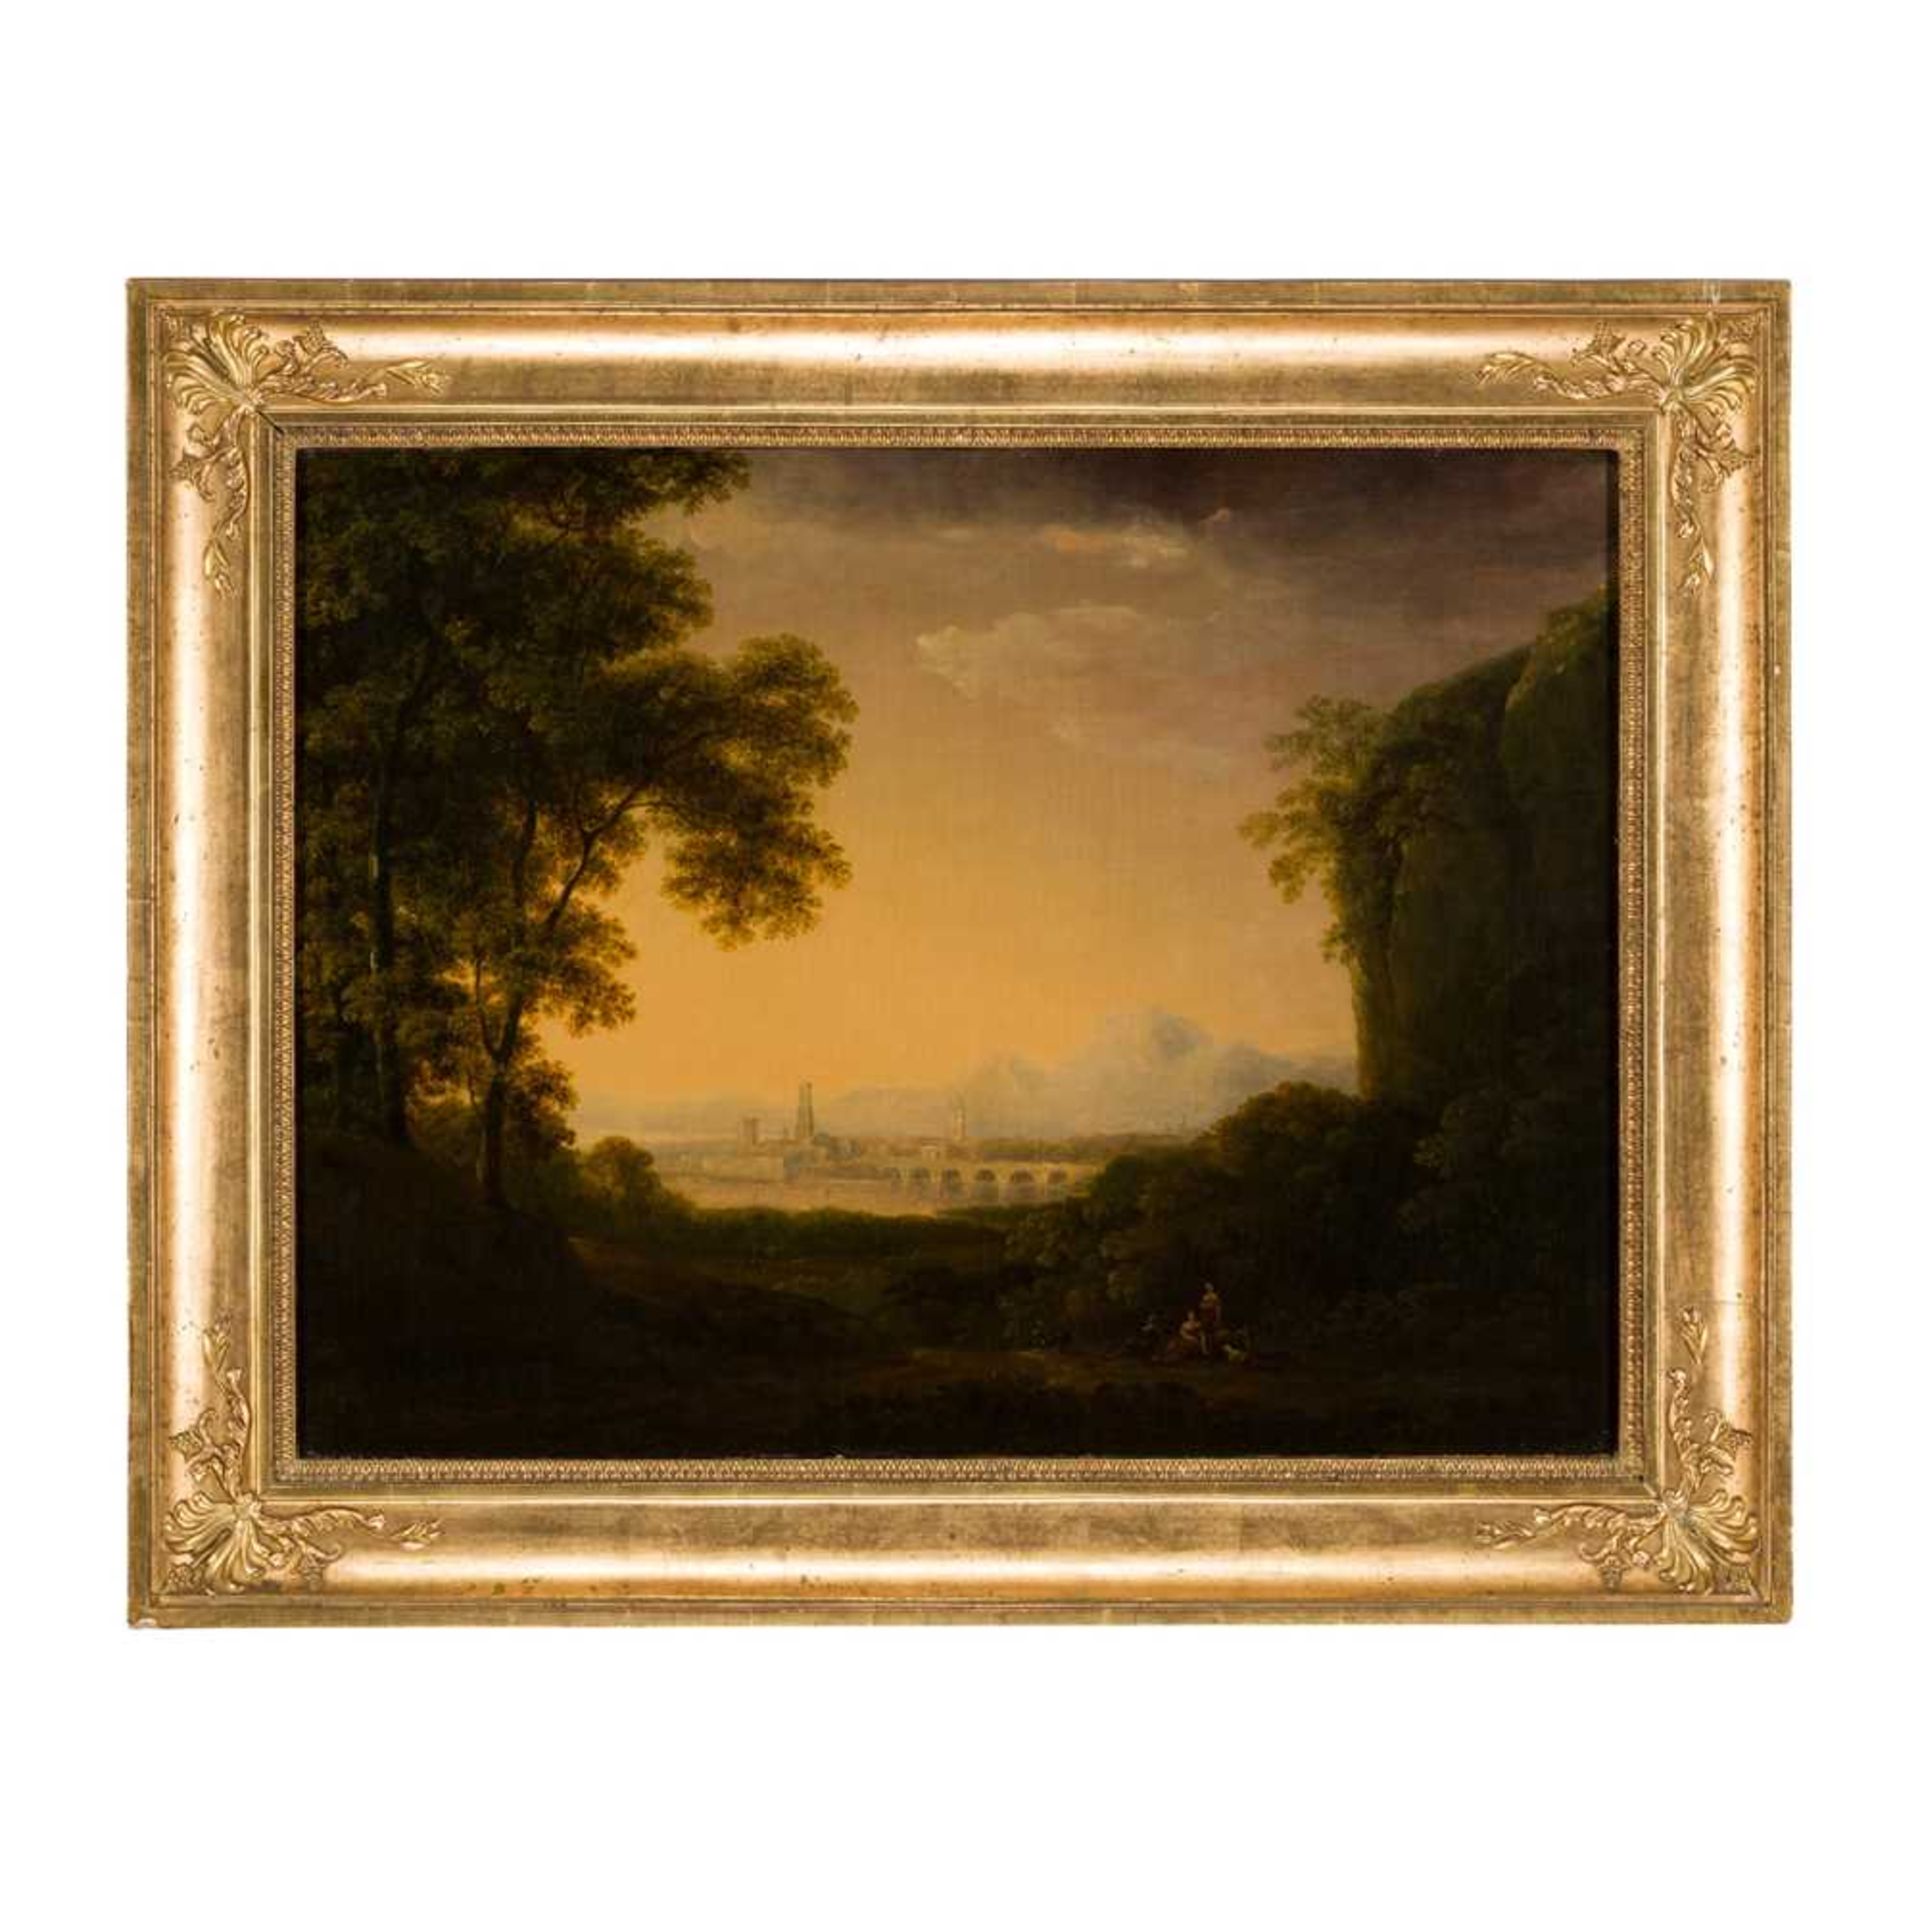 CIRCLE OF ALEXANDER NASMYTH FIGURES IN AN ITALIANATE LANDSCAPE - Image 2 of 3